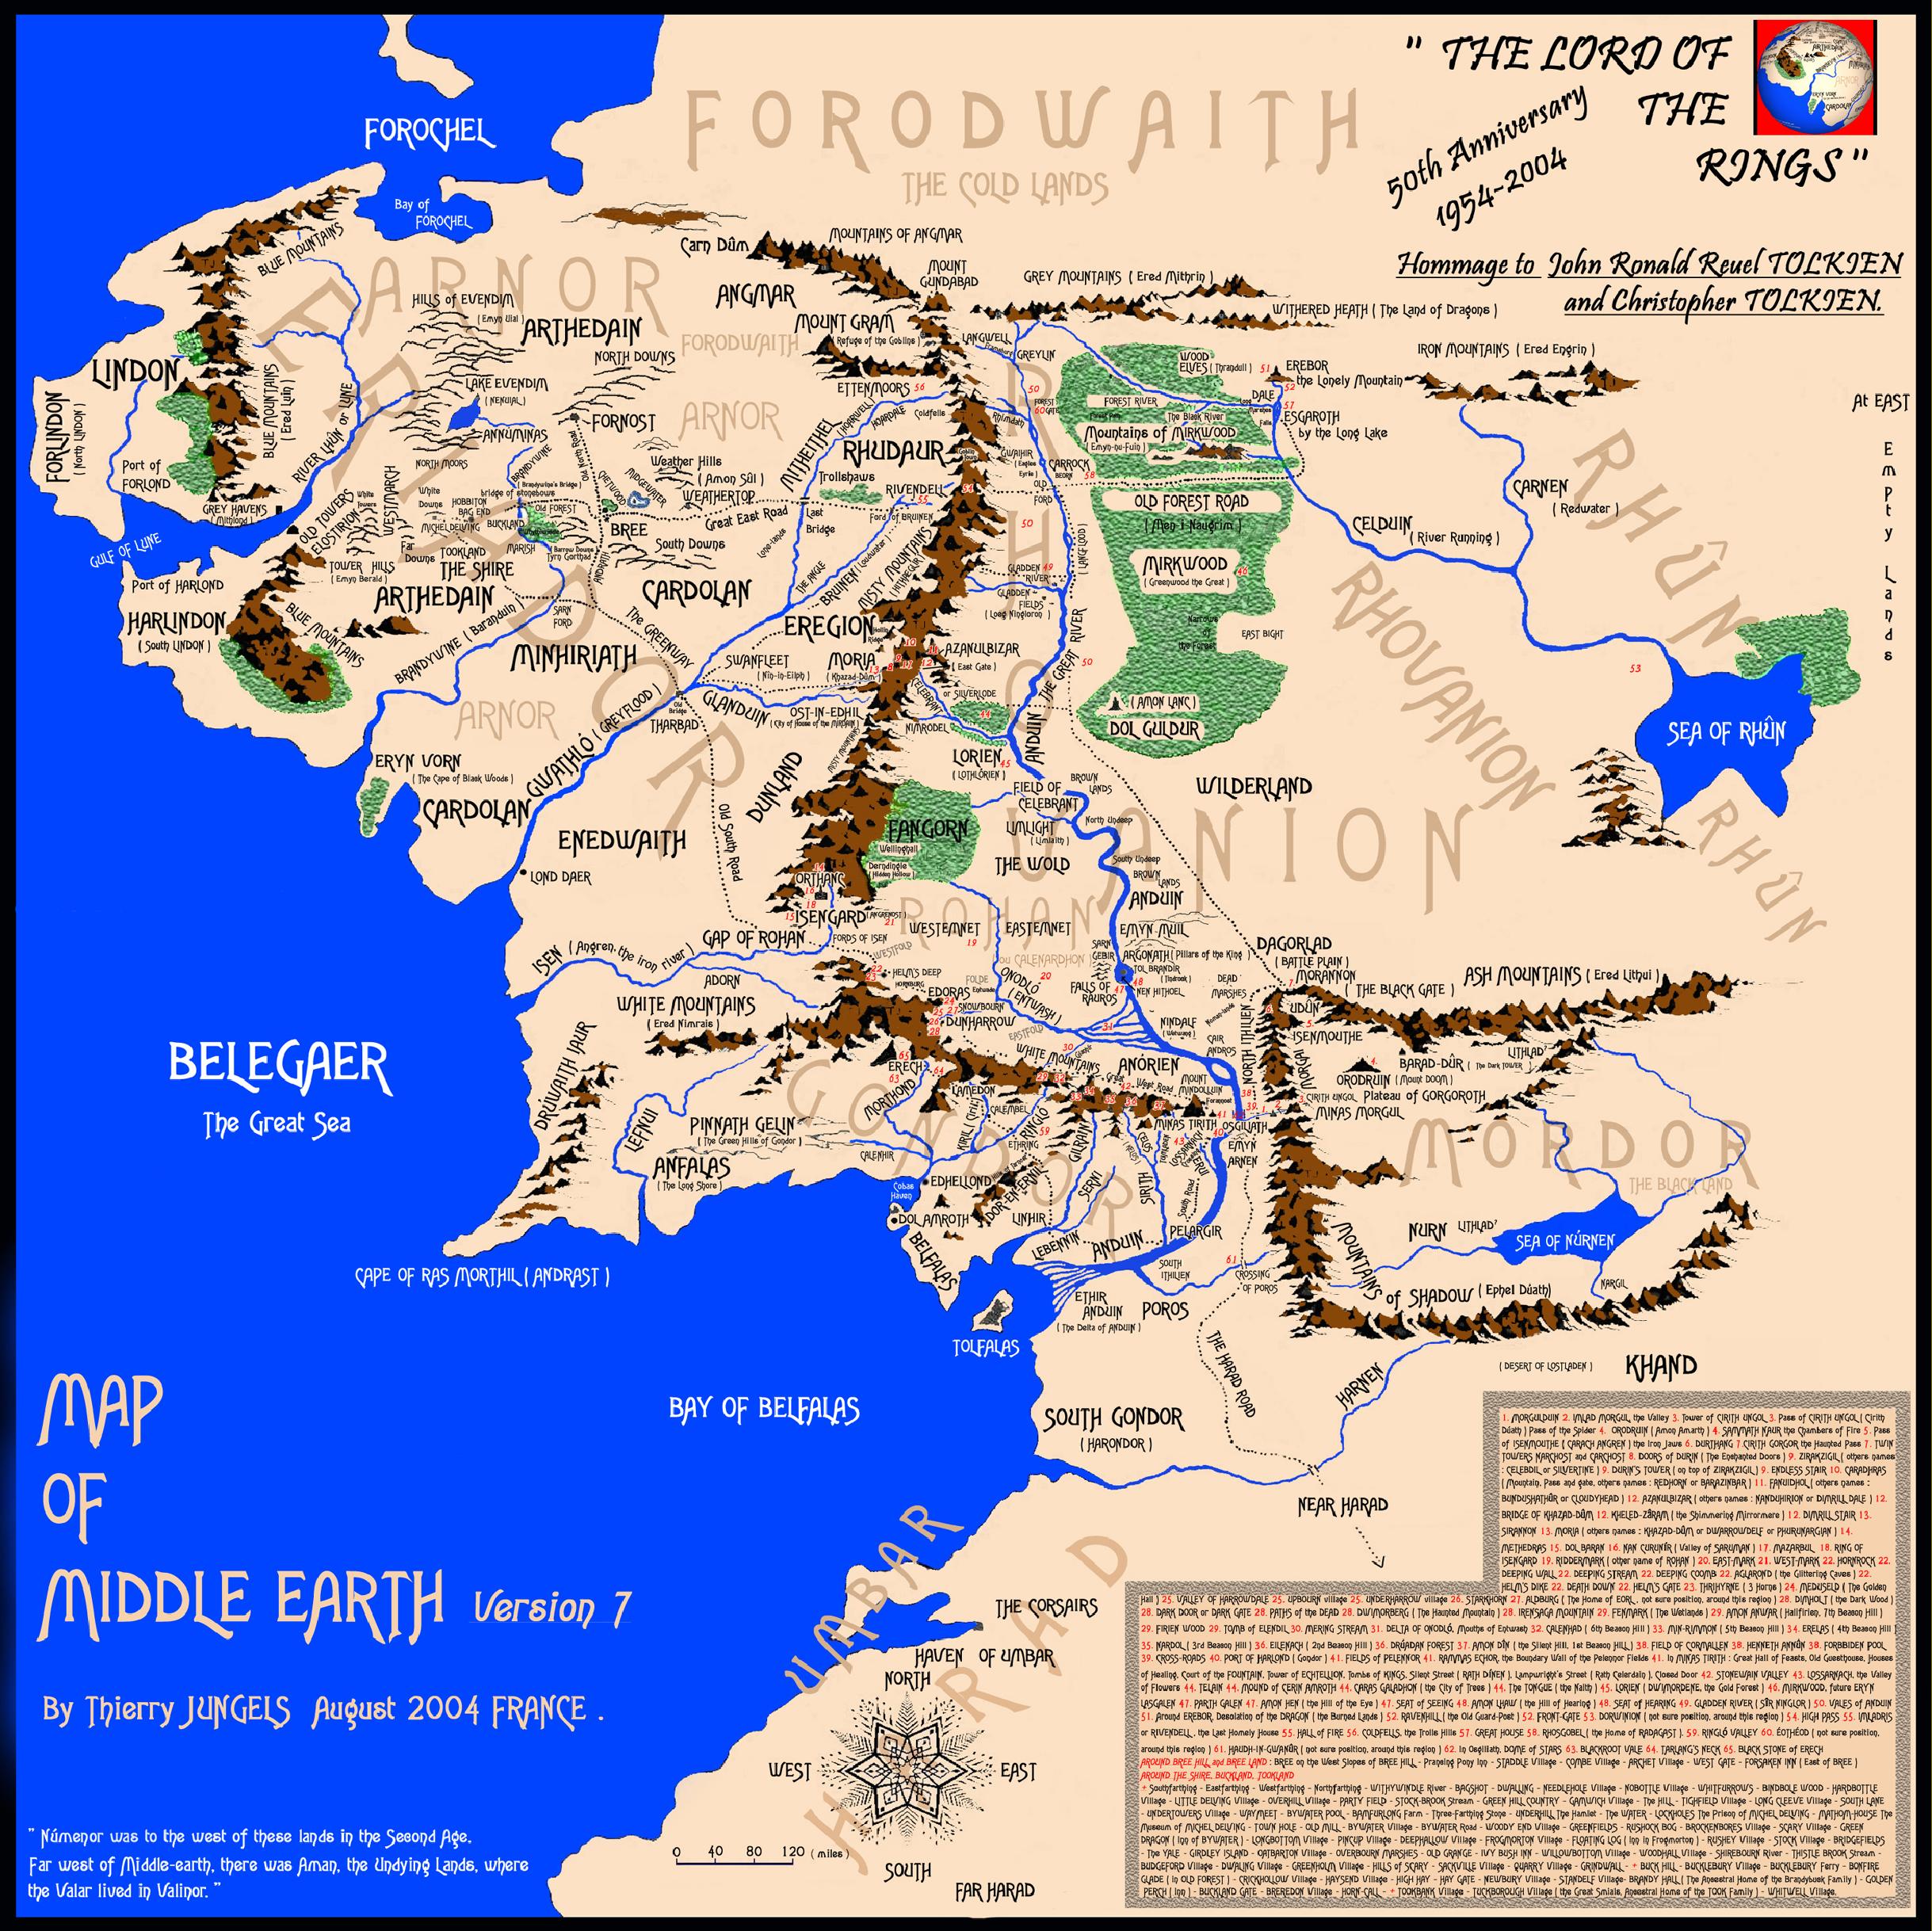 File:MAP-OF-MIDDLE-EARTH-VERSION-7.jpg